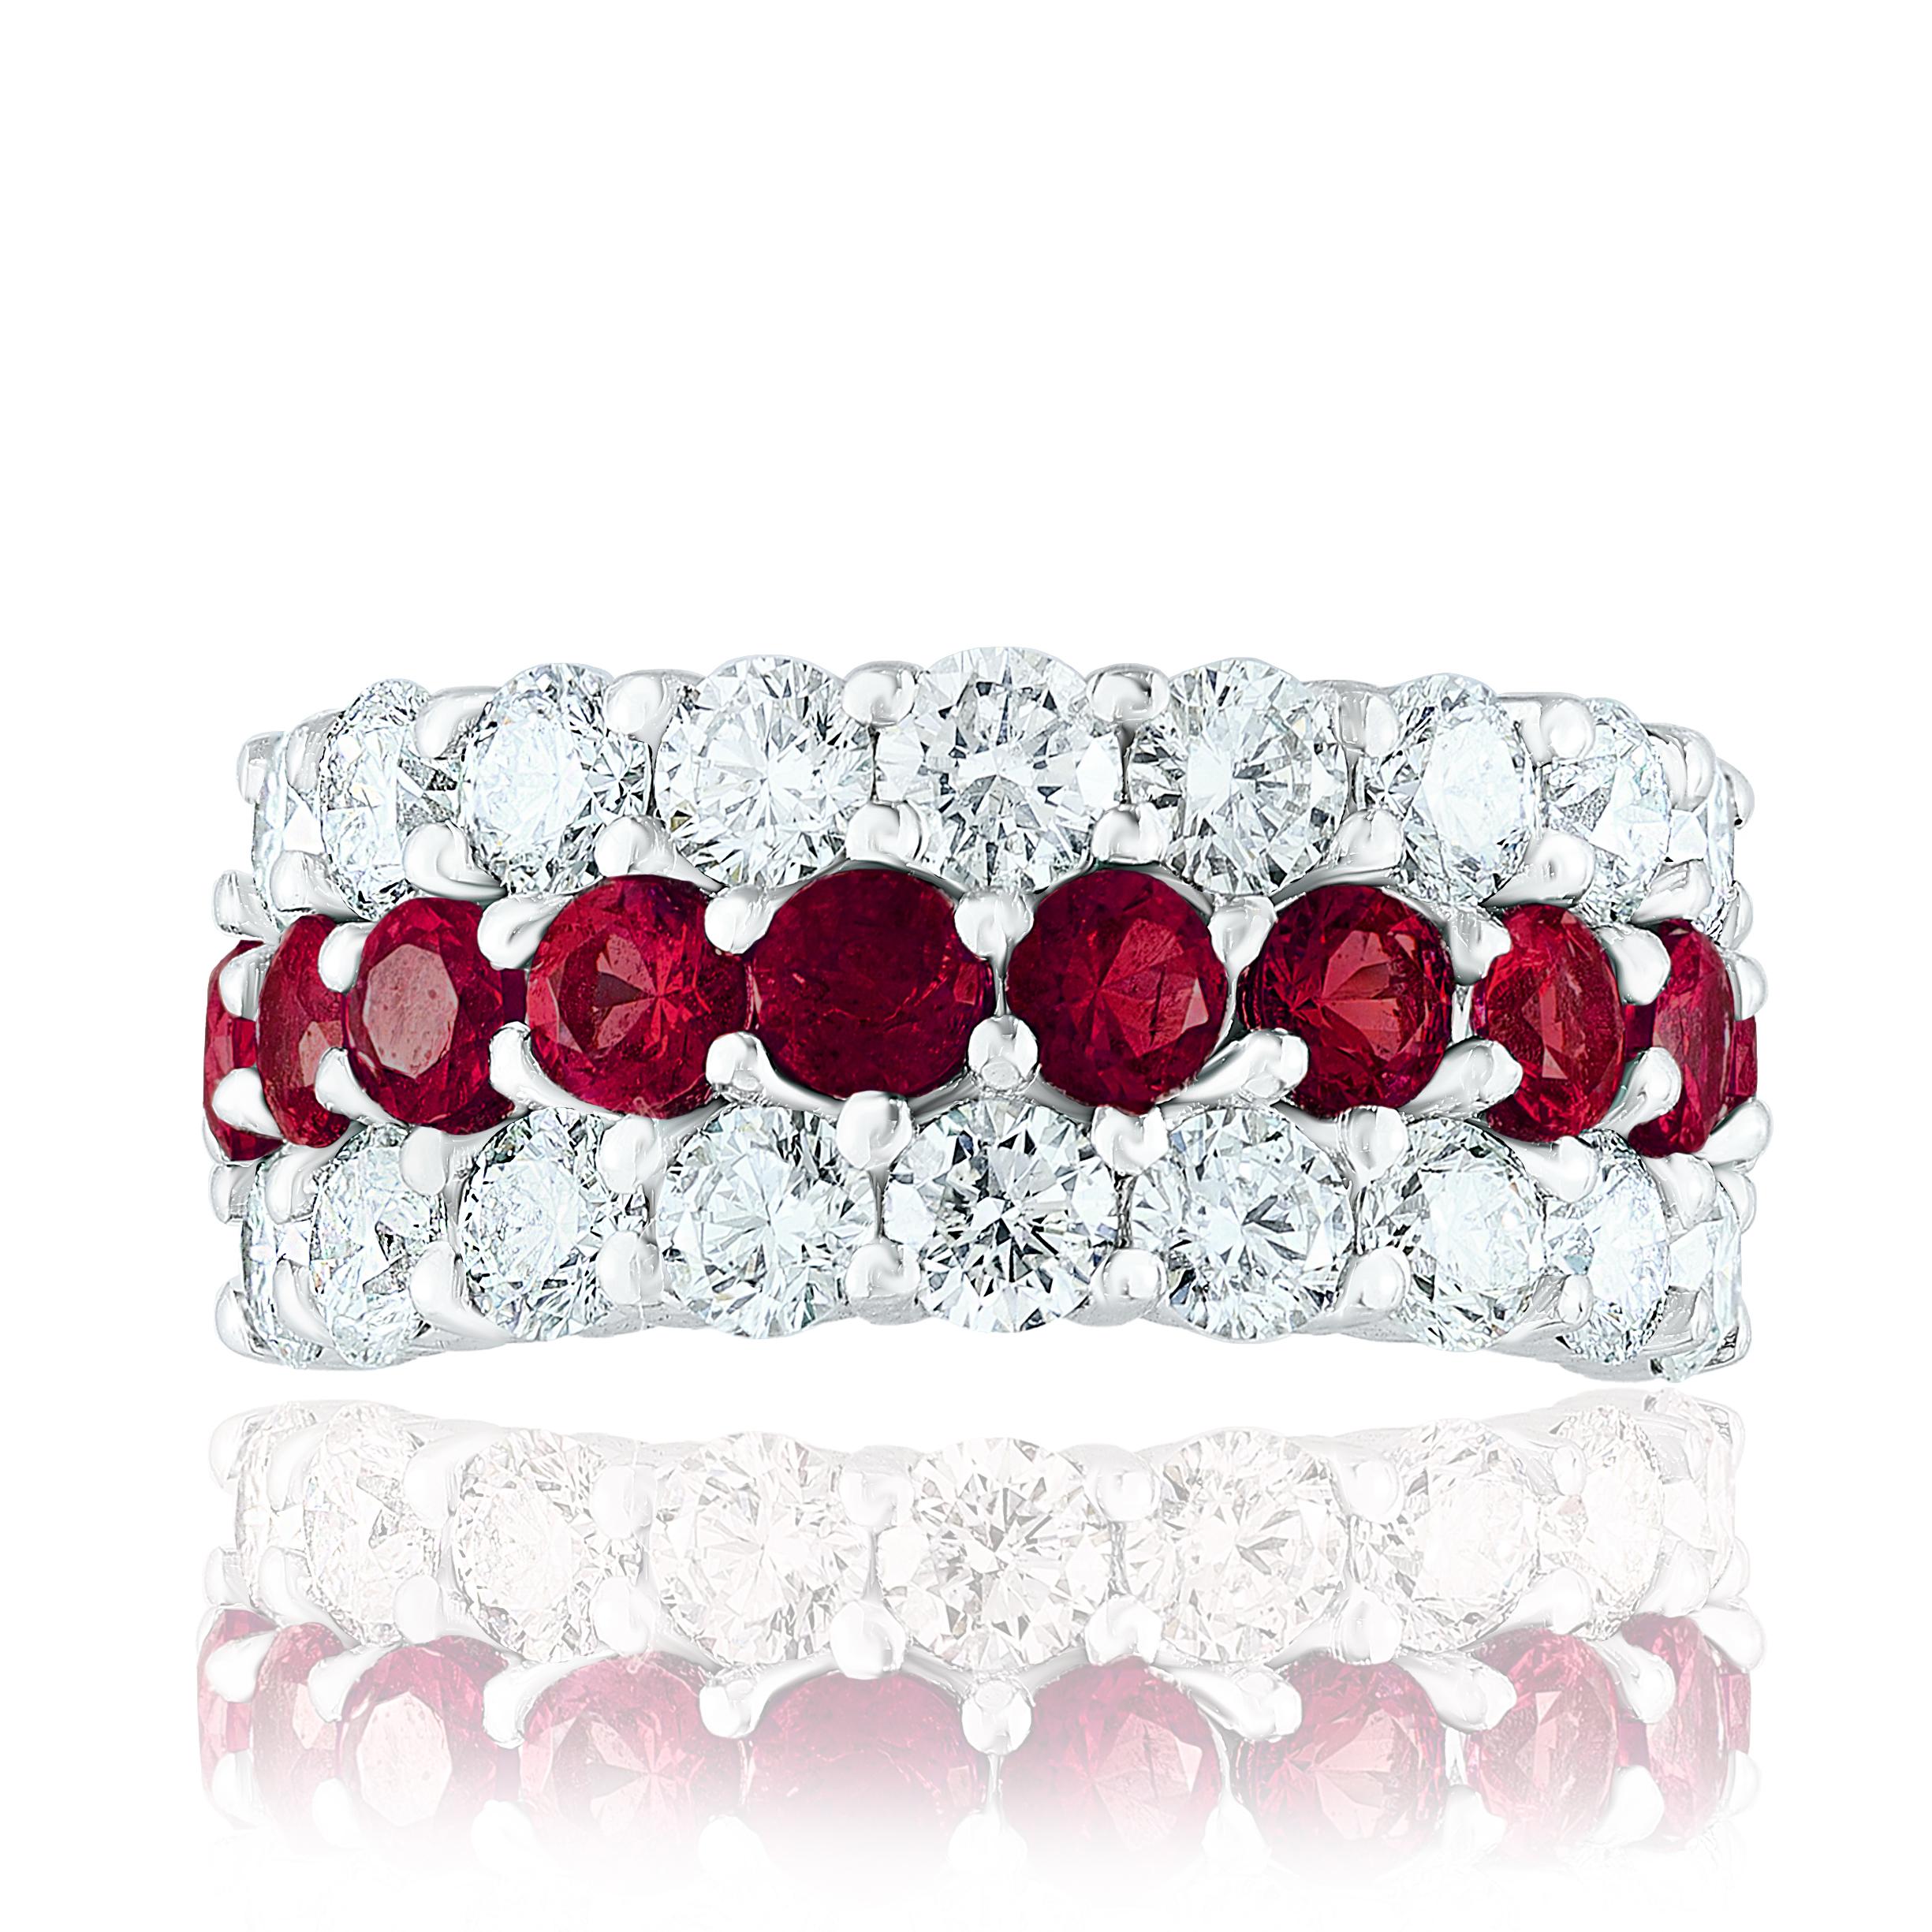 A unique and fashionable ring showcasing two rows of round-shape 18 diamonds and one row of 10 vibrant rubies in the middle, set in a band design. Rubies weigh 1.80 carats and Diamonds weigh 2.70 carats total. A brilliant and masterfully-made